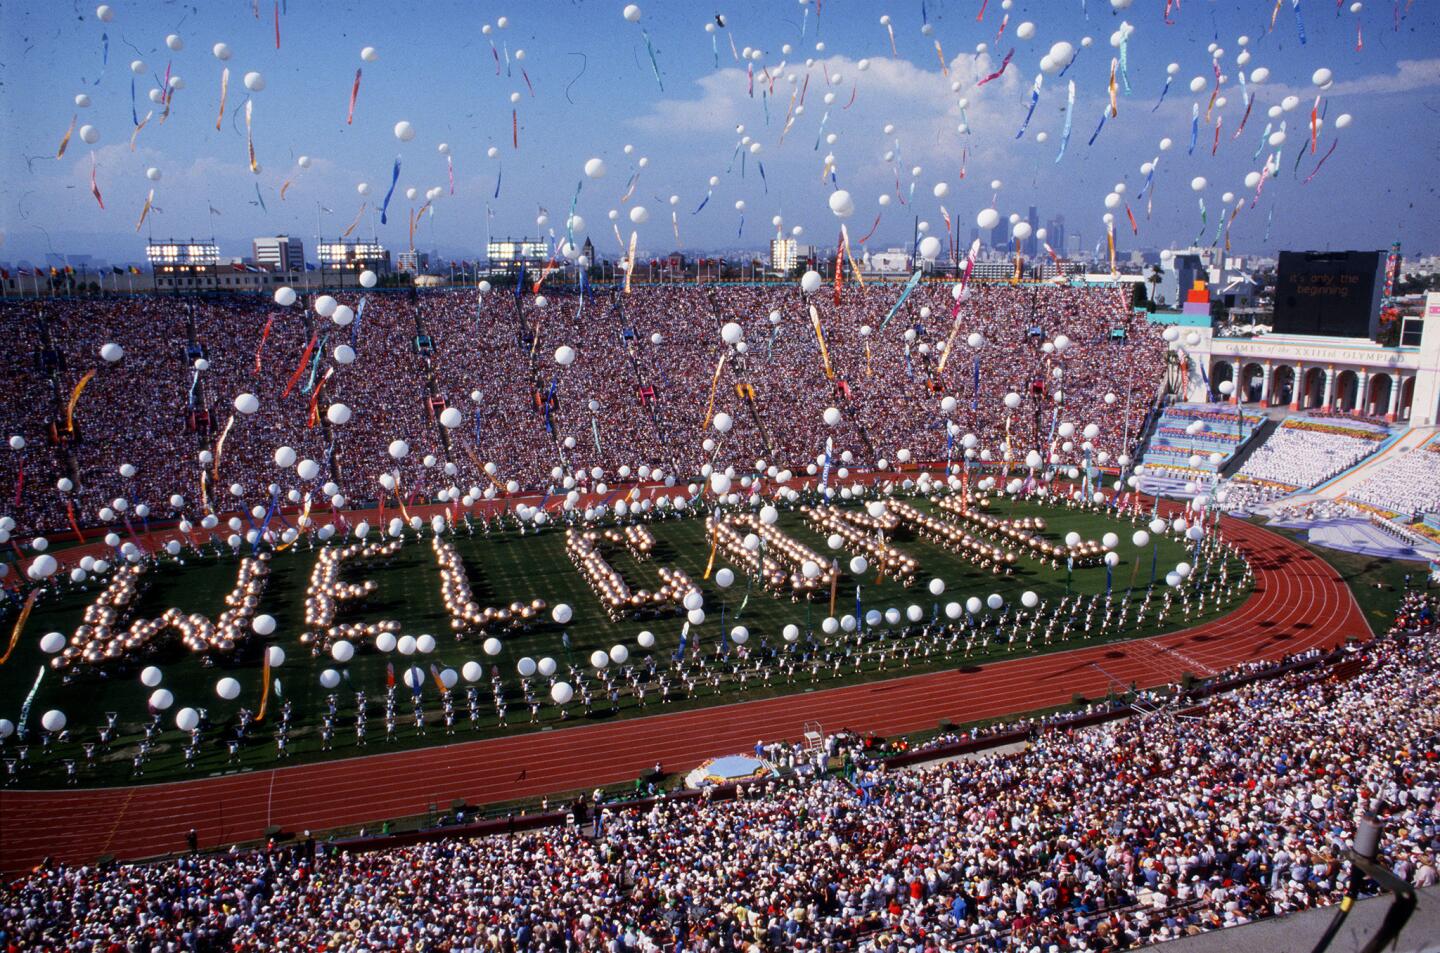 Scene at the Coliseum in Los Angeles during the opening ceremonies of the 1984 Summer Olympic Games.